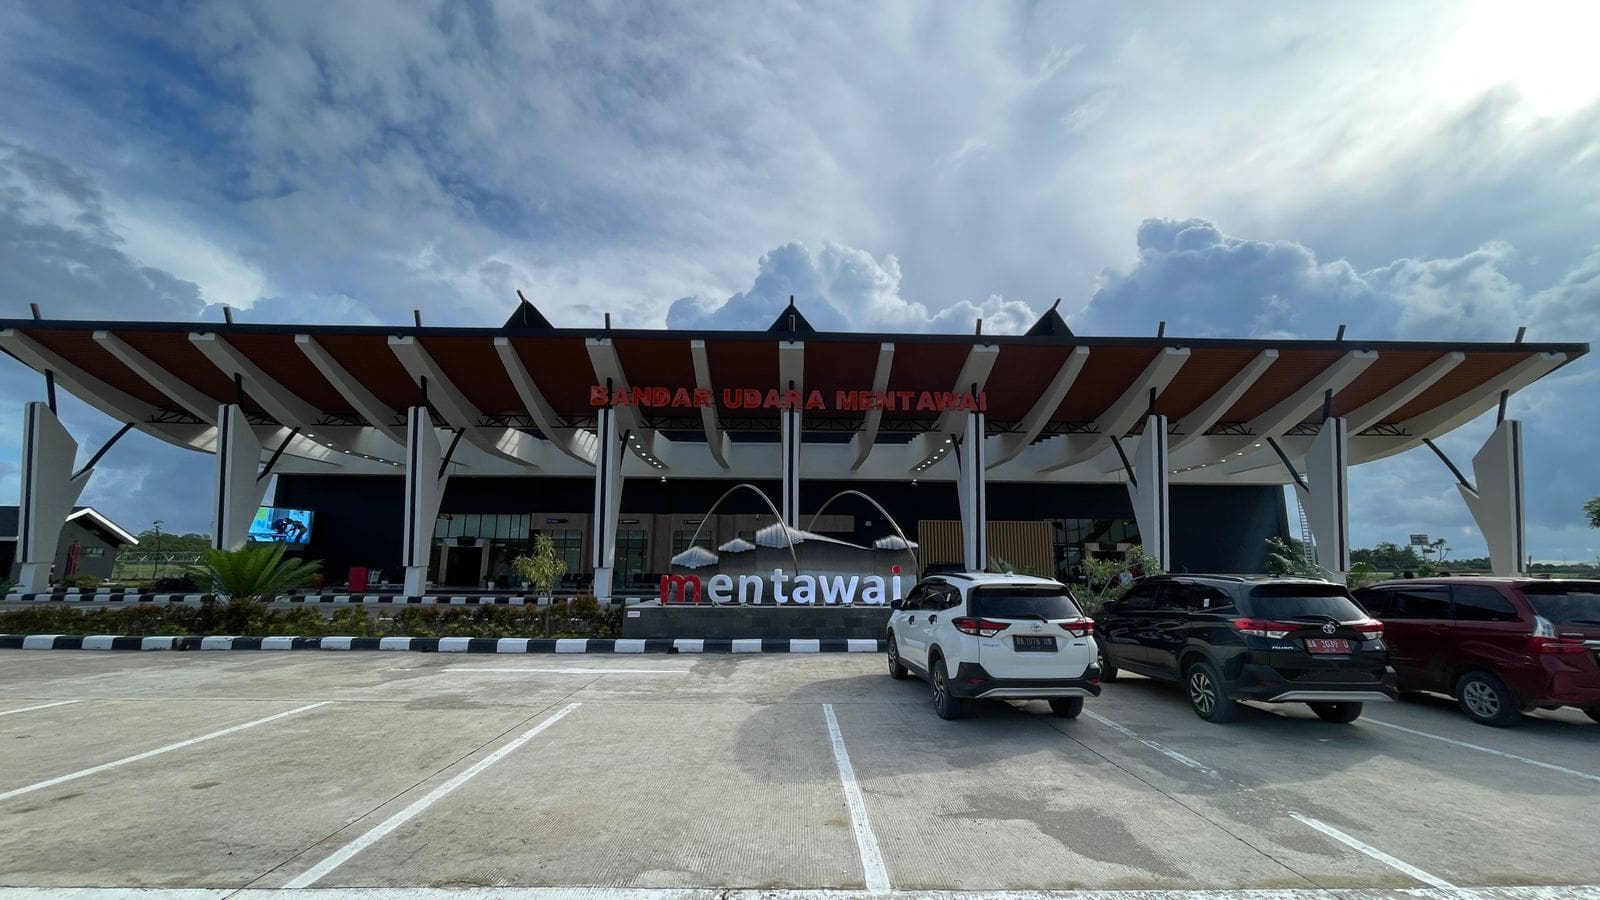 New Mentawai Airport Will Allow For Over 50K Travelers a Year!